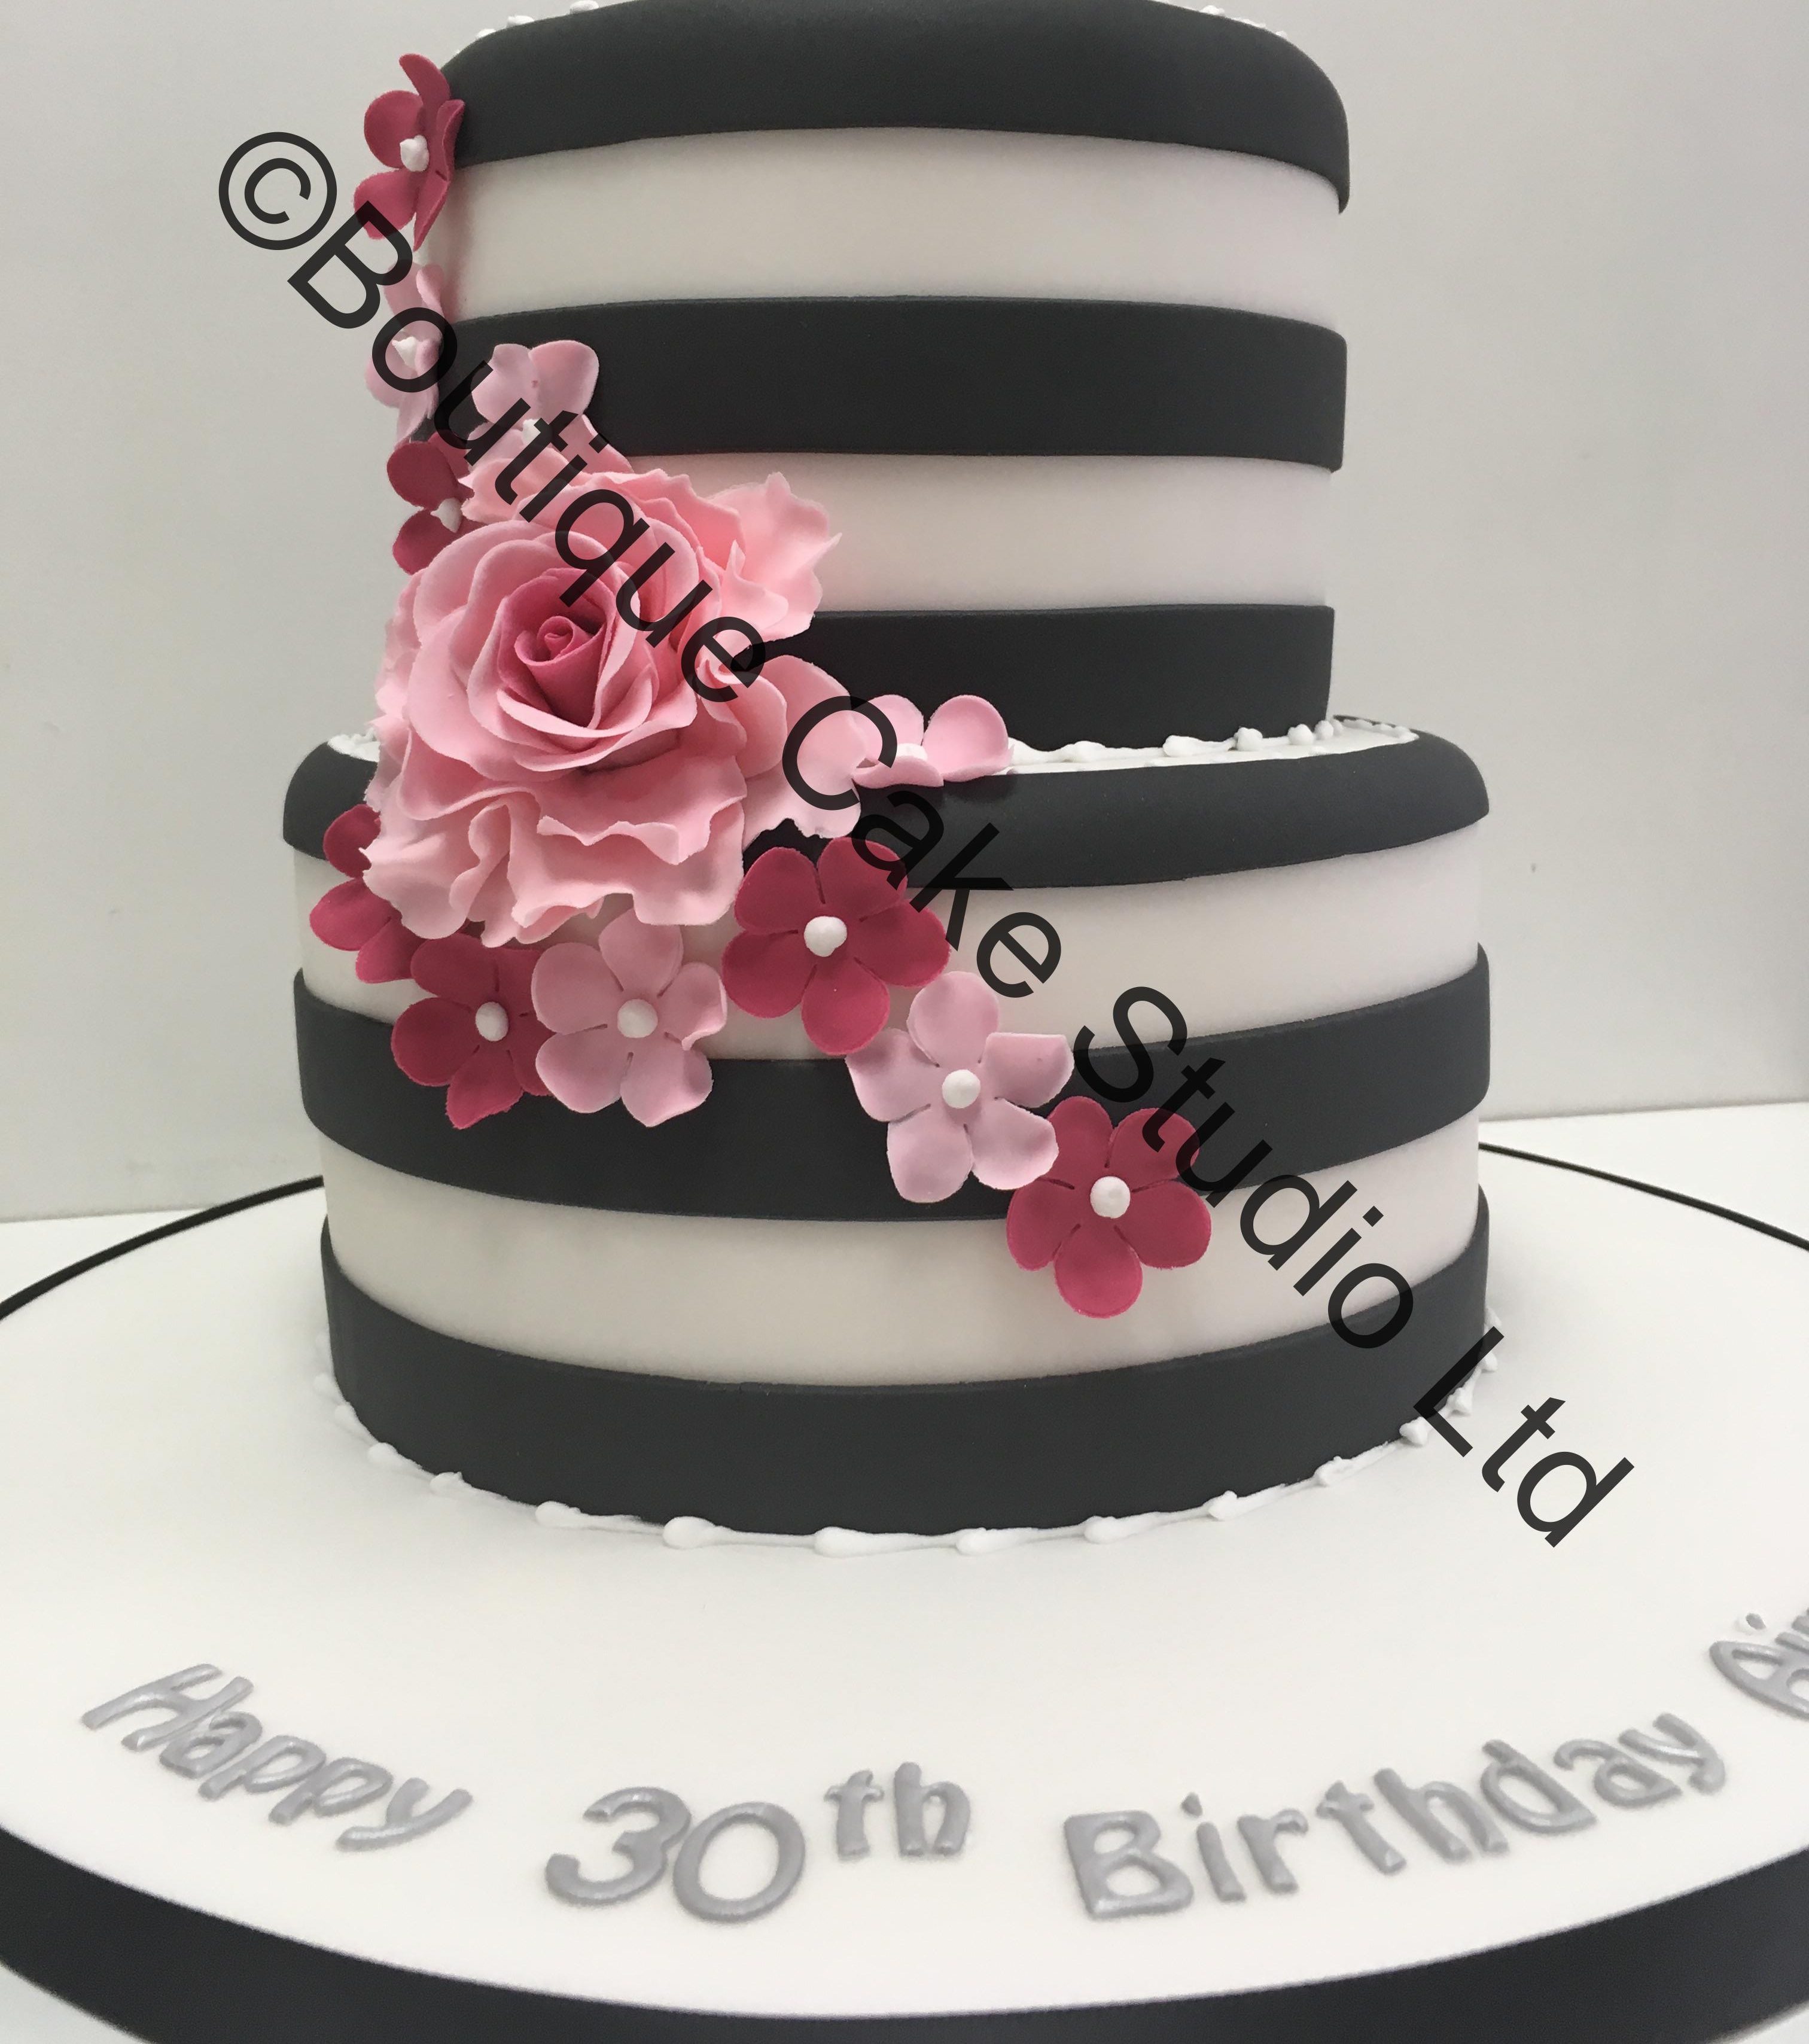 Black and White striped stacked cake with pink flowers